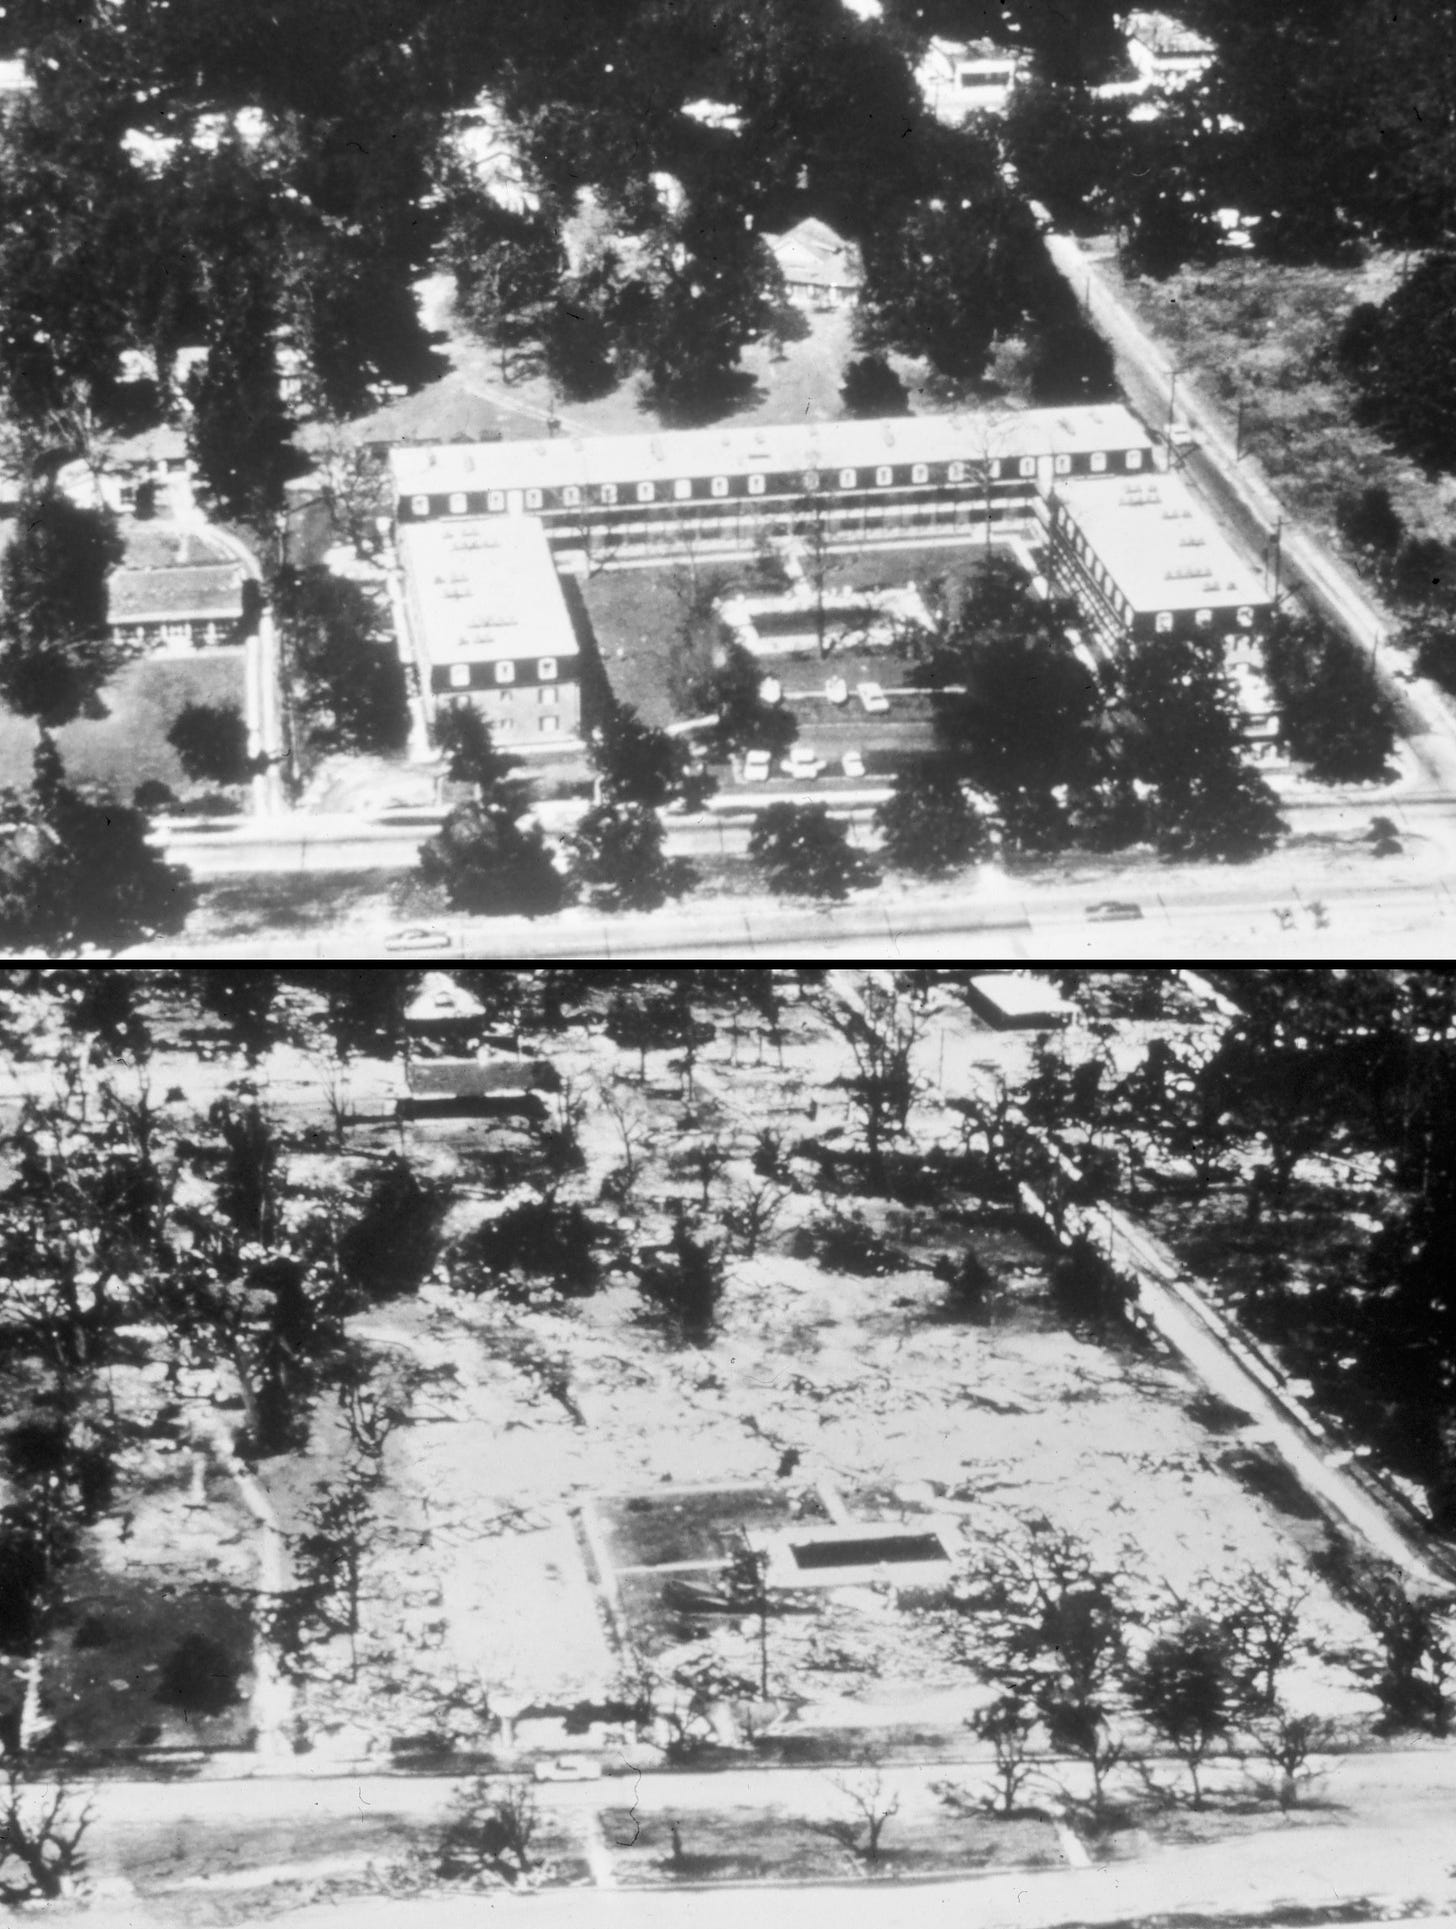 Hurricane Camille Richelieu Apartments before and after